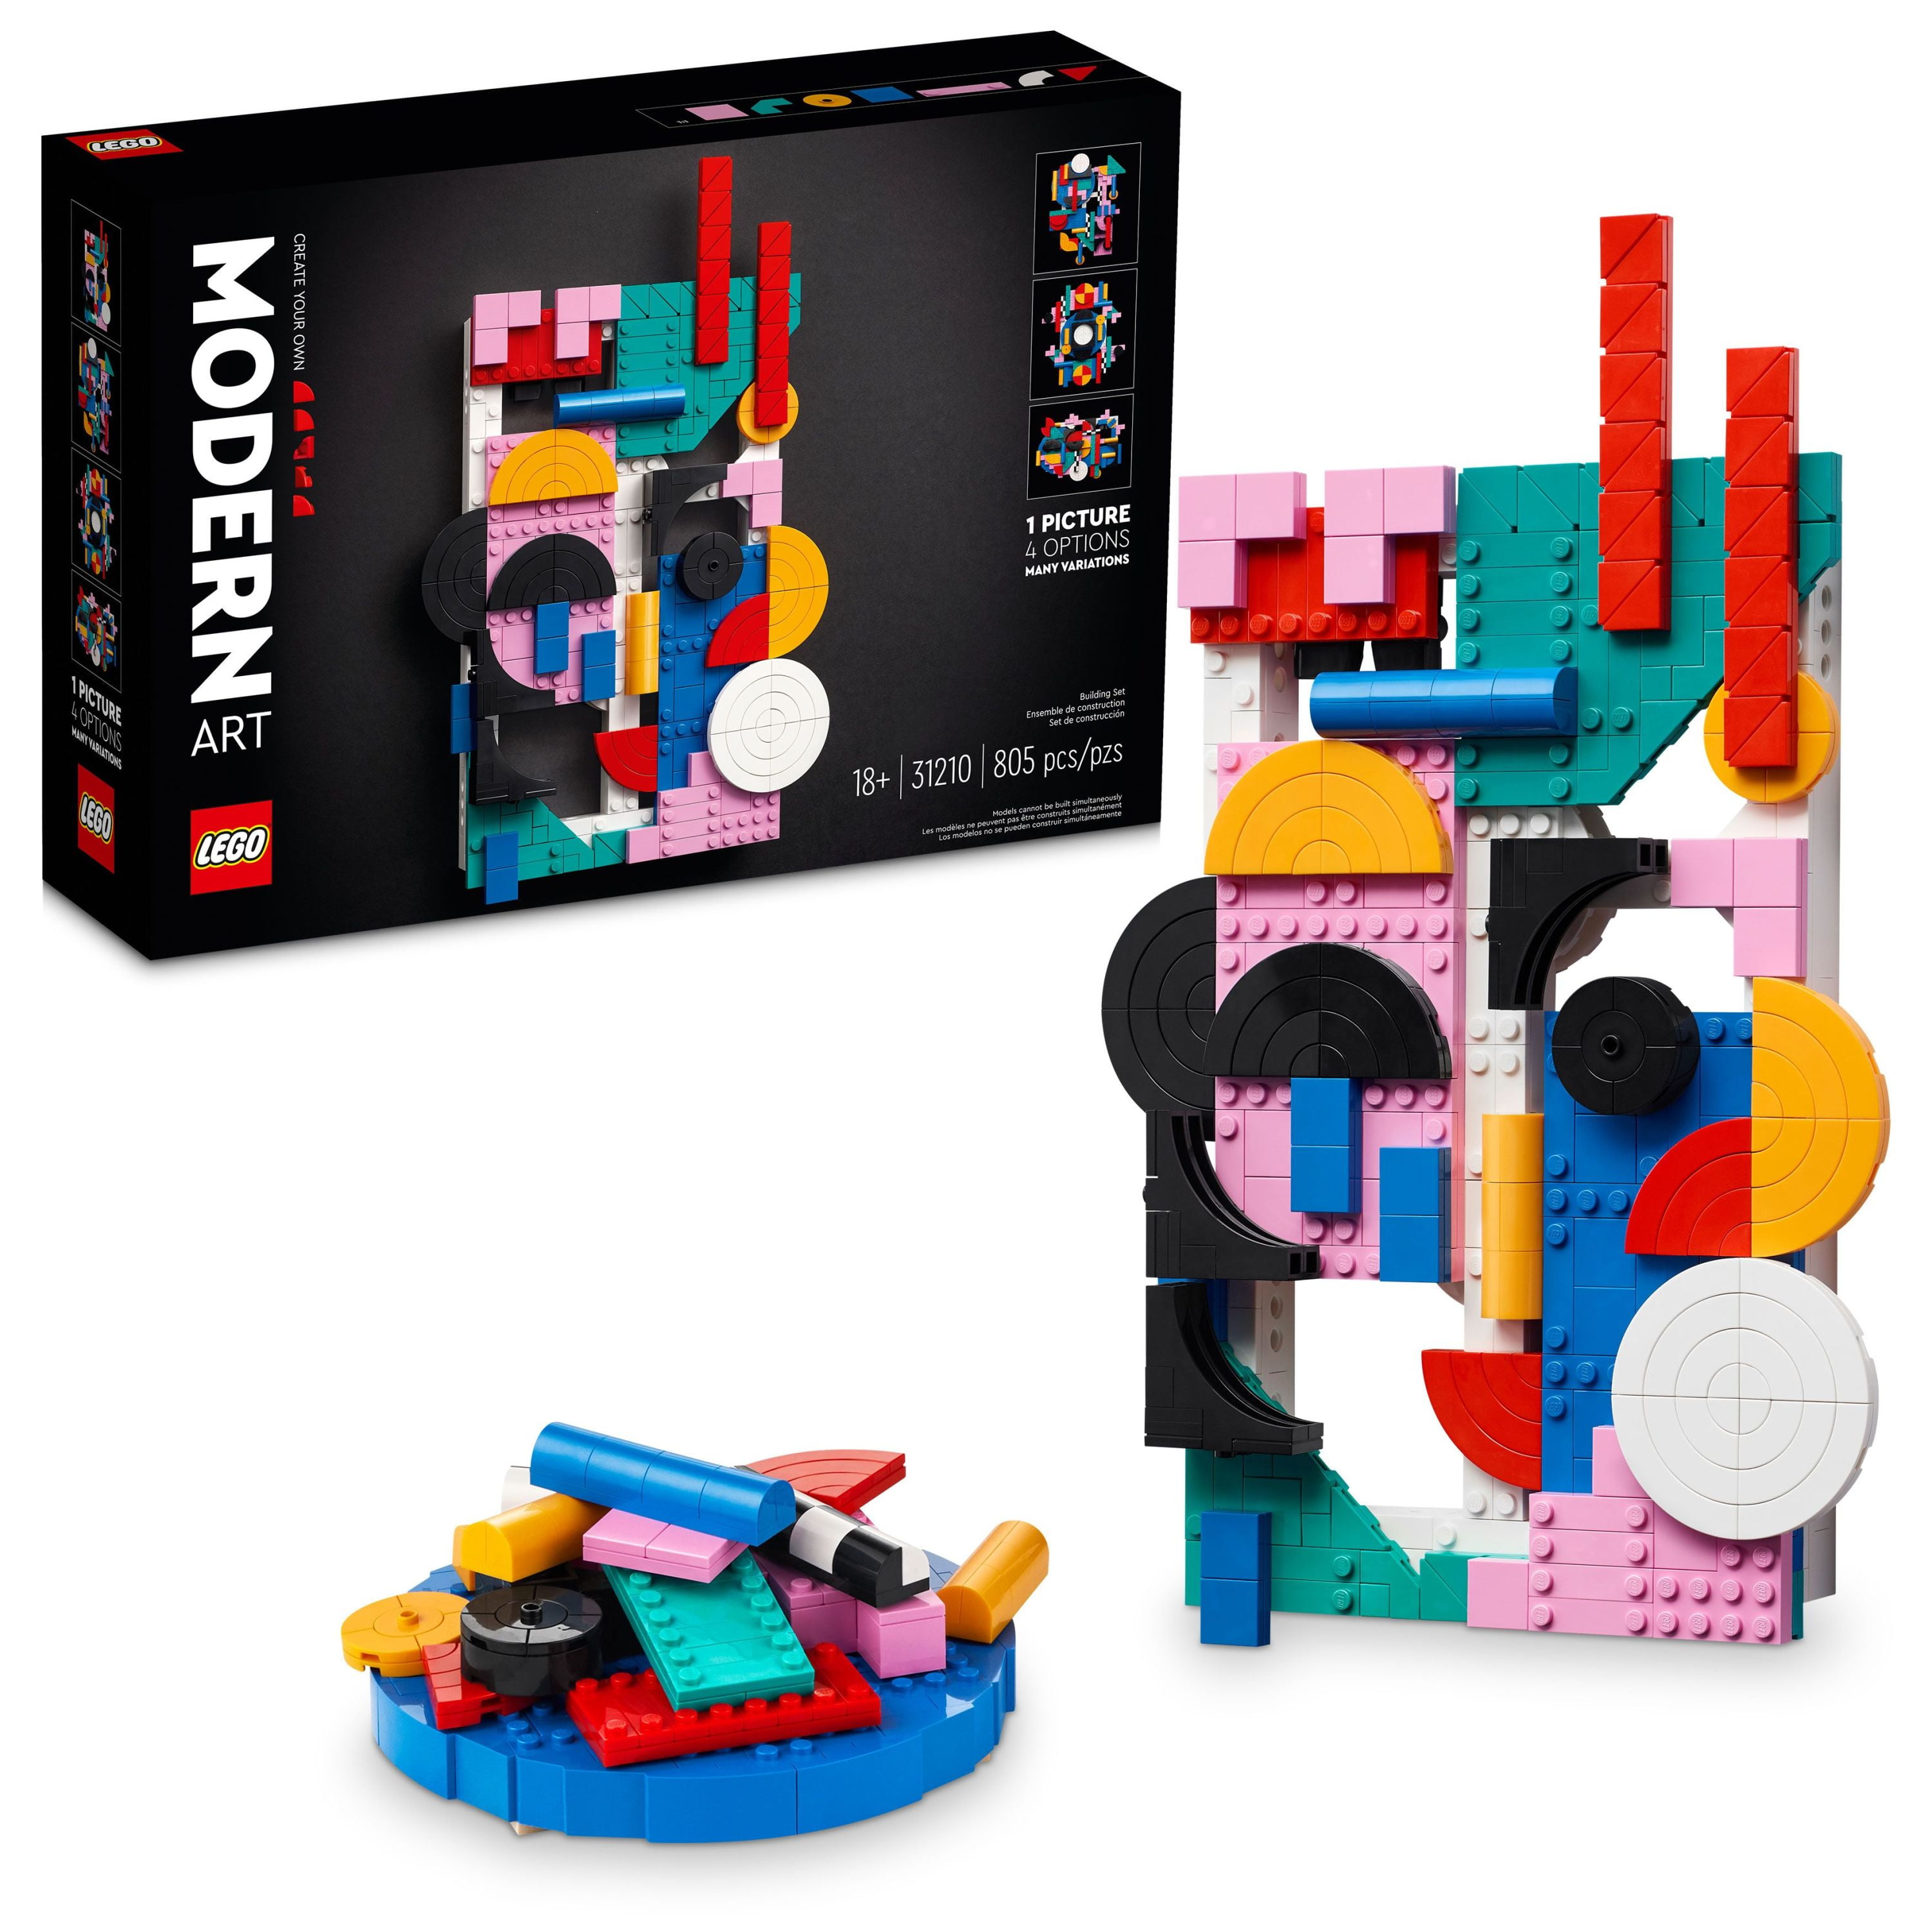 LEGO Art Modern Art 31210 Build & Display Home Décor Abstract Wall Art Kit,  Birthday Gift Idea for Artistic People, Set for Teens or Adults Who Enjoy